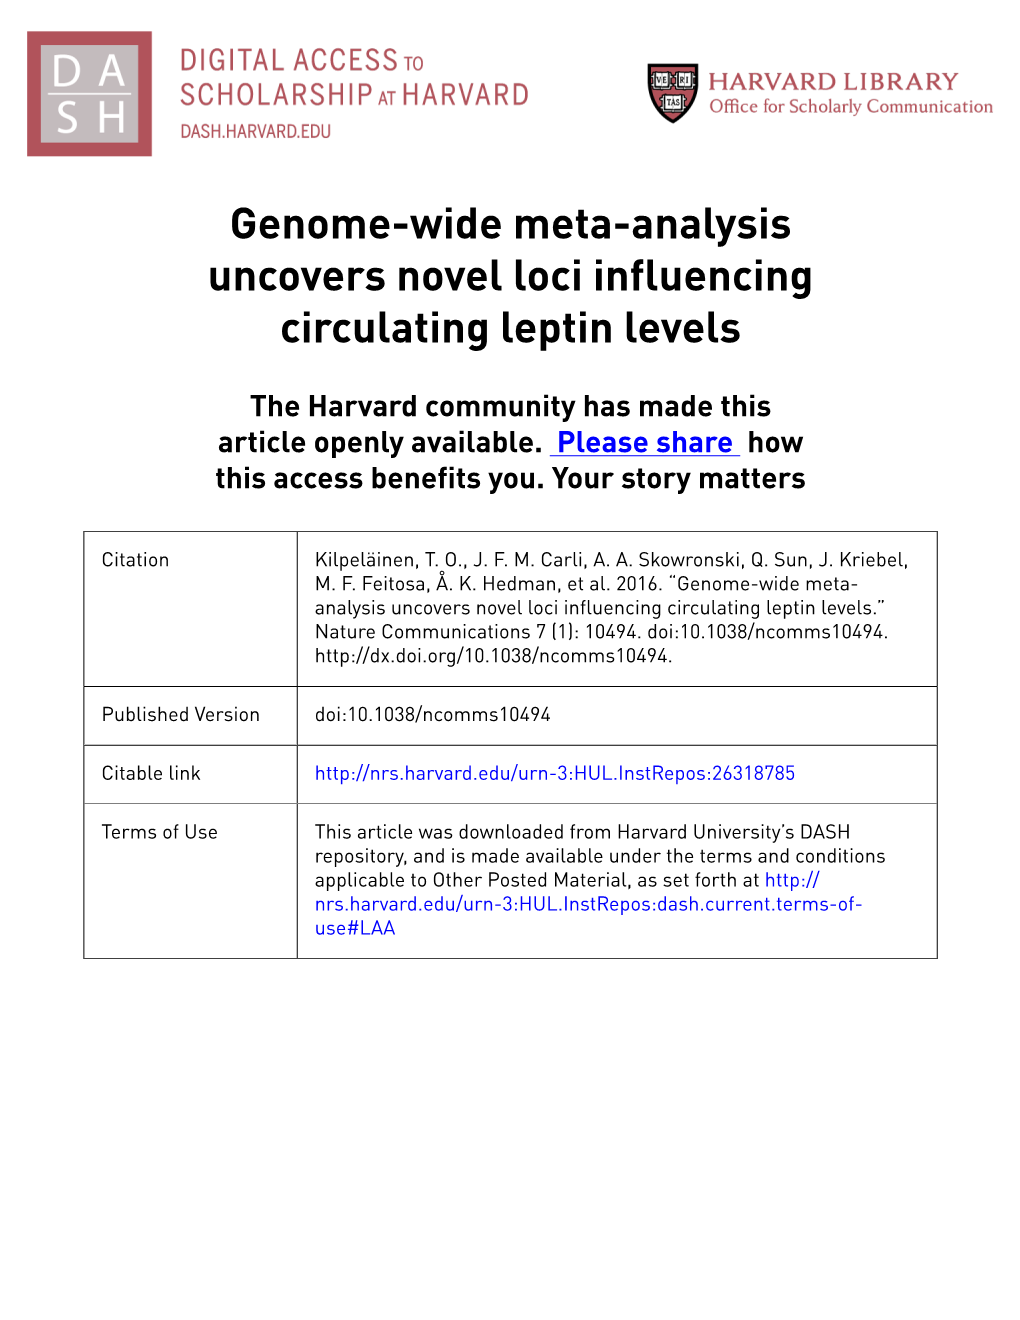 Genome-Wide Meta-Analysis Uncovers Novel Loci Influencing Circulating Leptin Levels